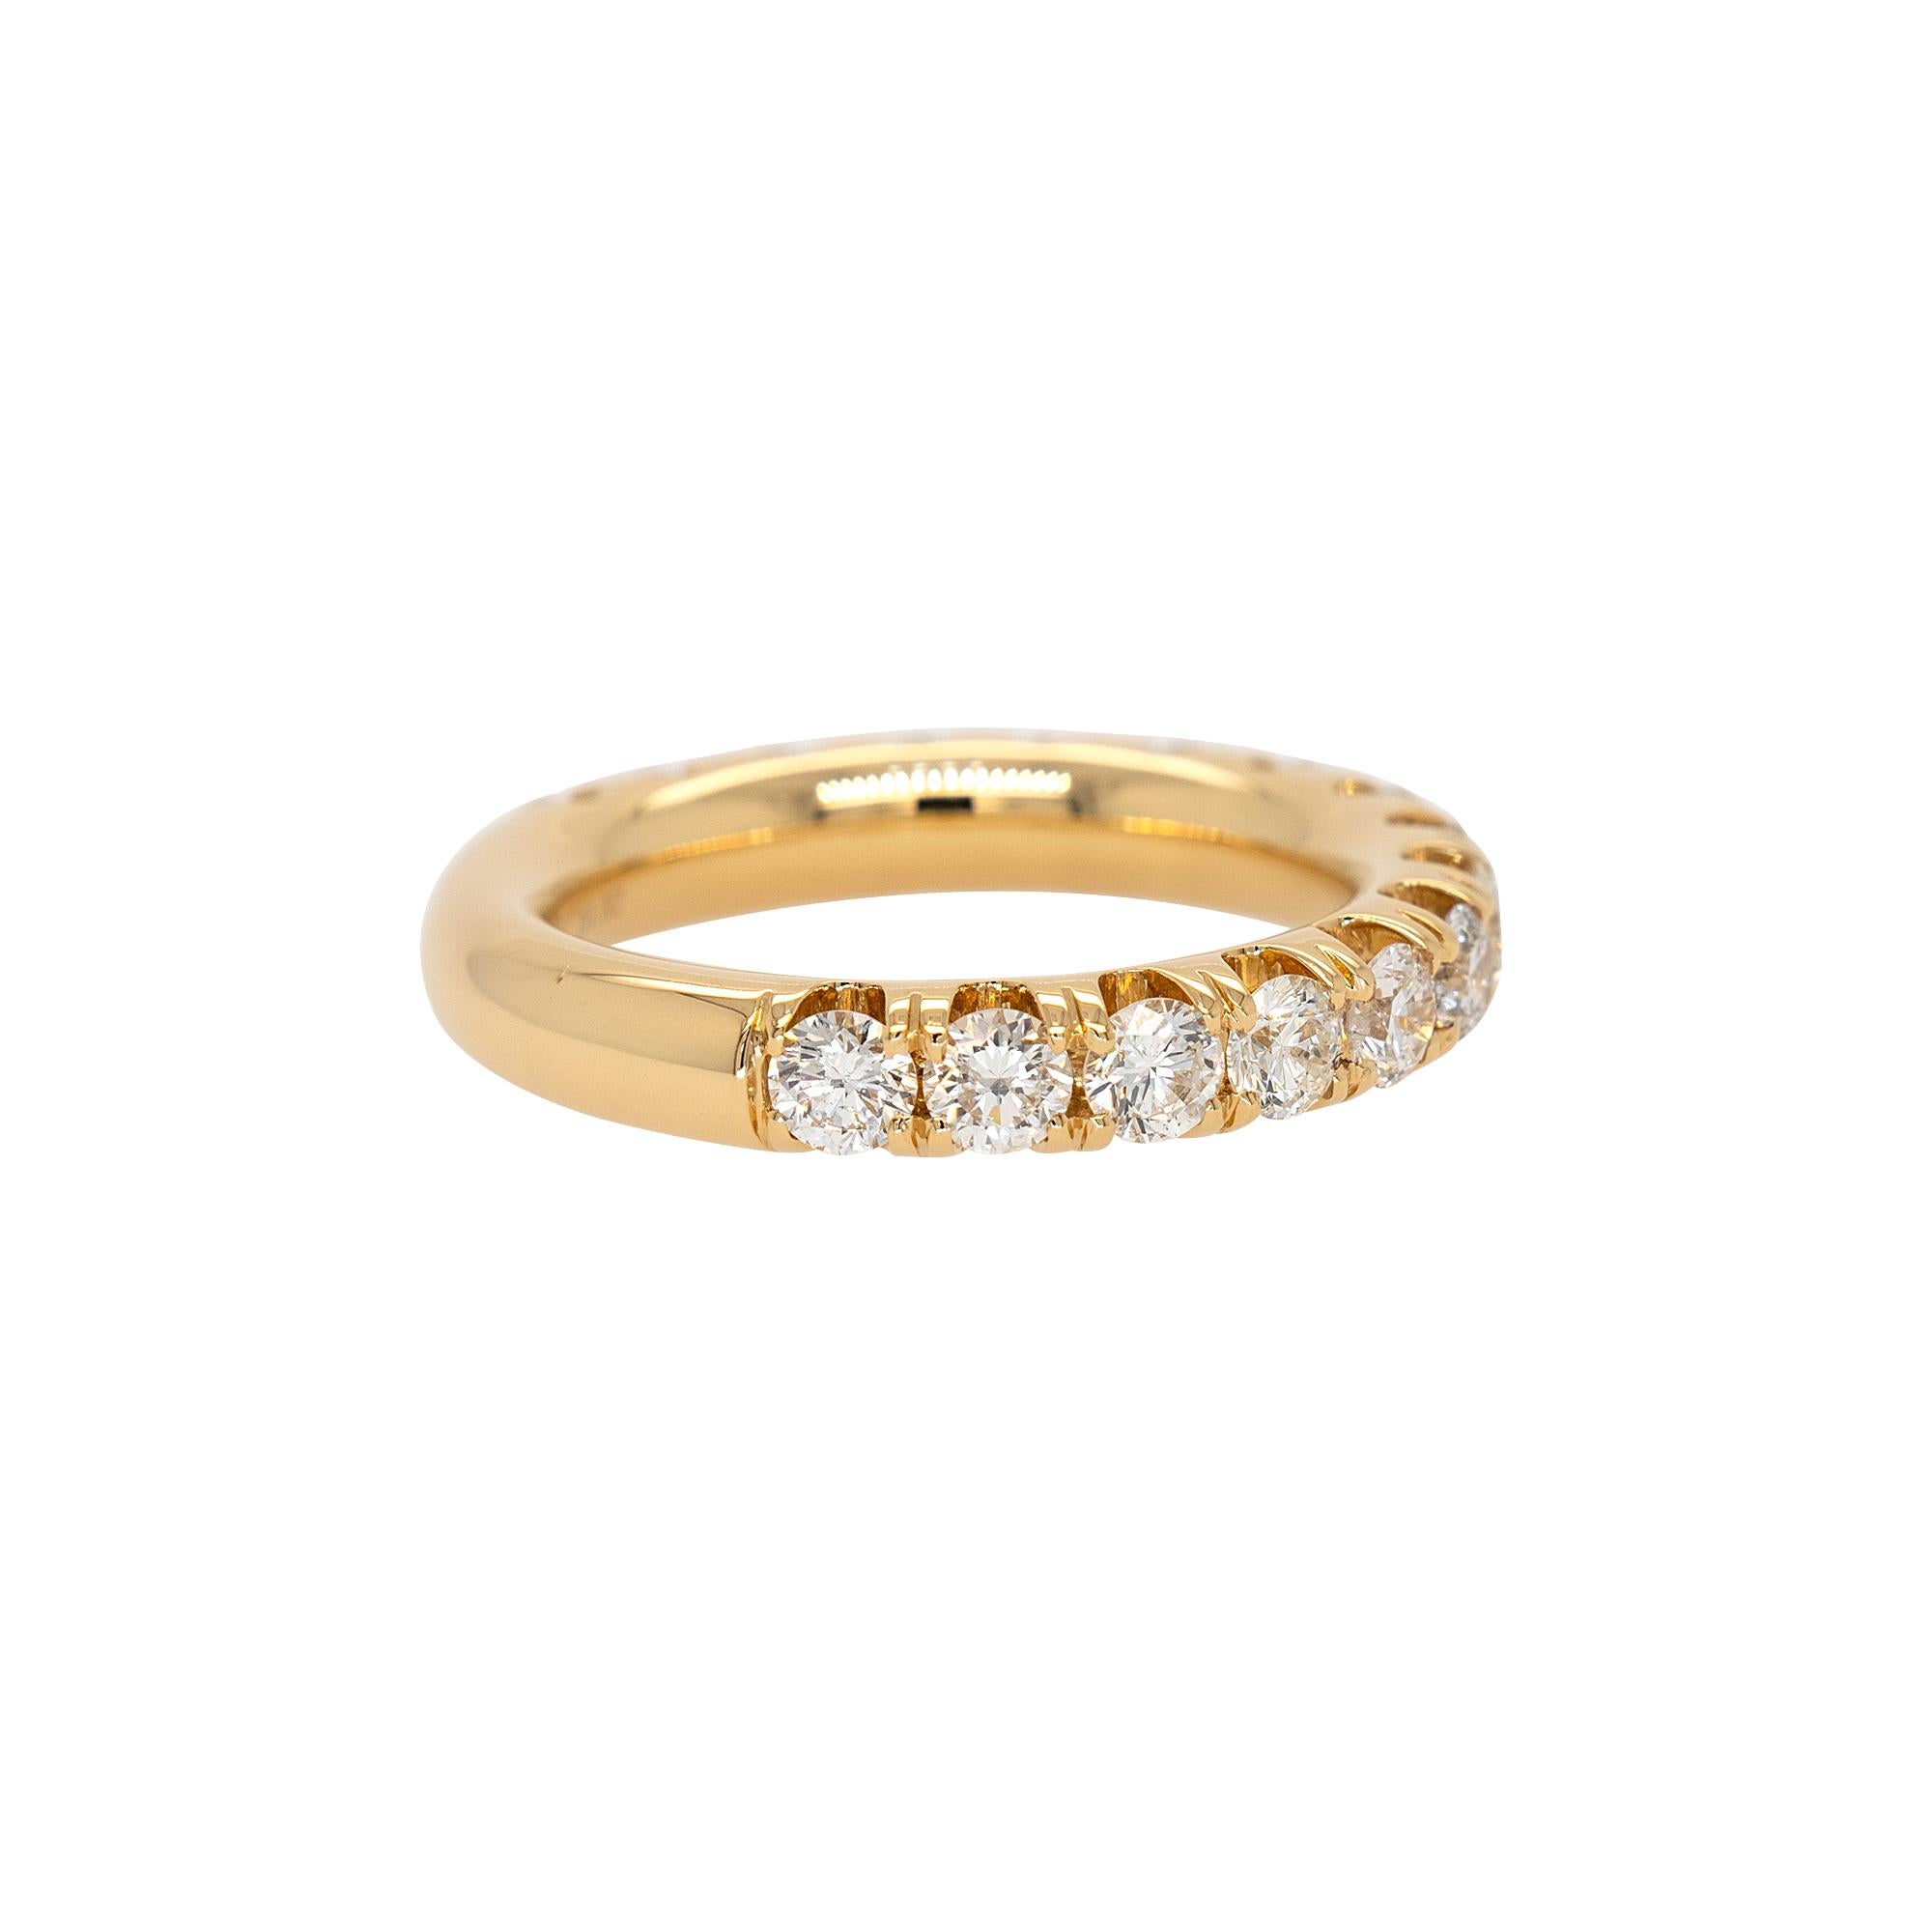 Diamond Details:
1.82ct Round Brilliant Natural Diamond
G Color VS Clarity
Ring Material: 18k Yellow Gold
Ring Size: 6.25 (can be sized)
Total Weight: 6.4g (4.1dwt)
This item comes with a presentation box!
SKU: A30317333

A fusion of sophistication